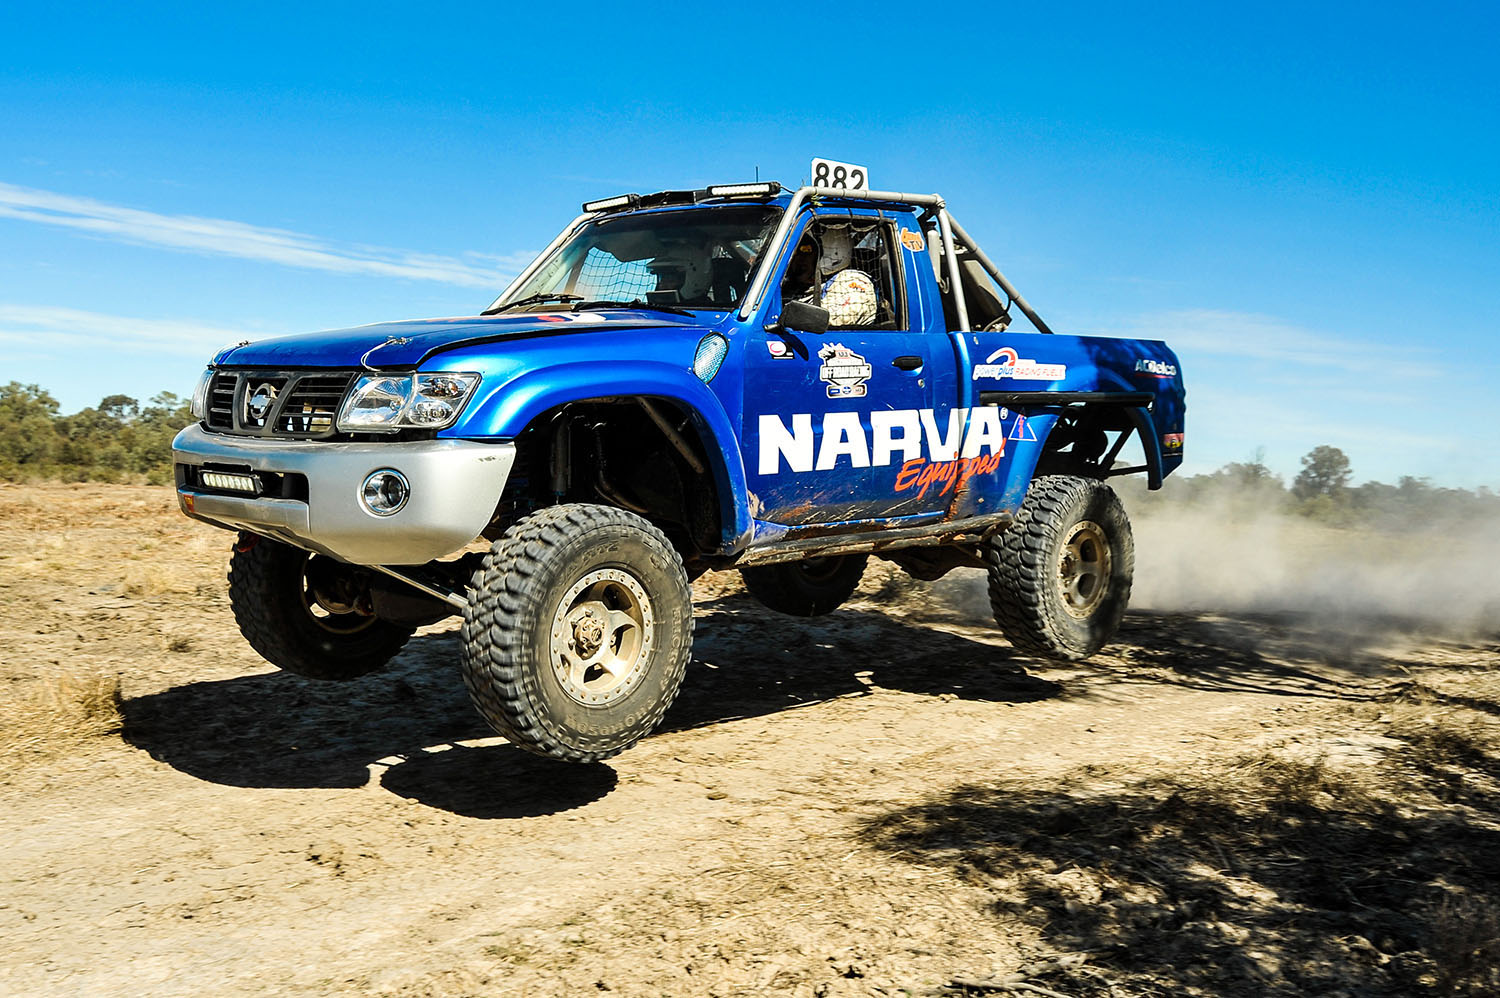 Mick Magher Motorsport is prepared for the ARB Series Curtain Raiser in Broken Hill